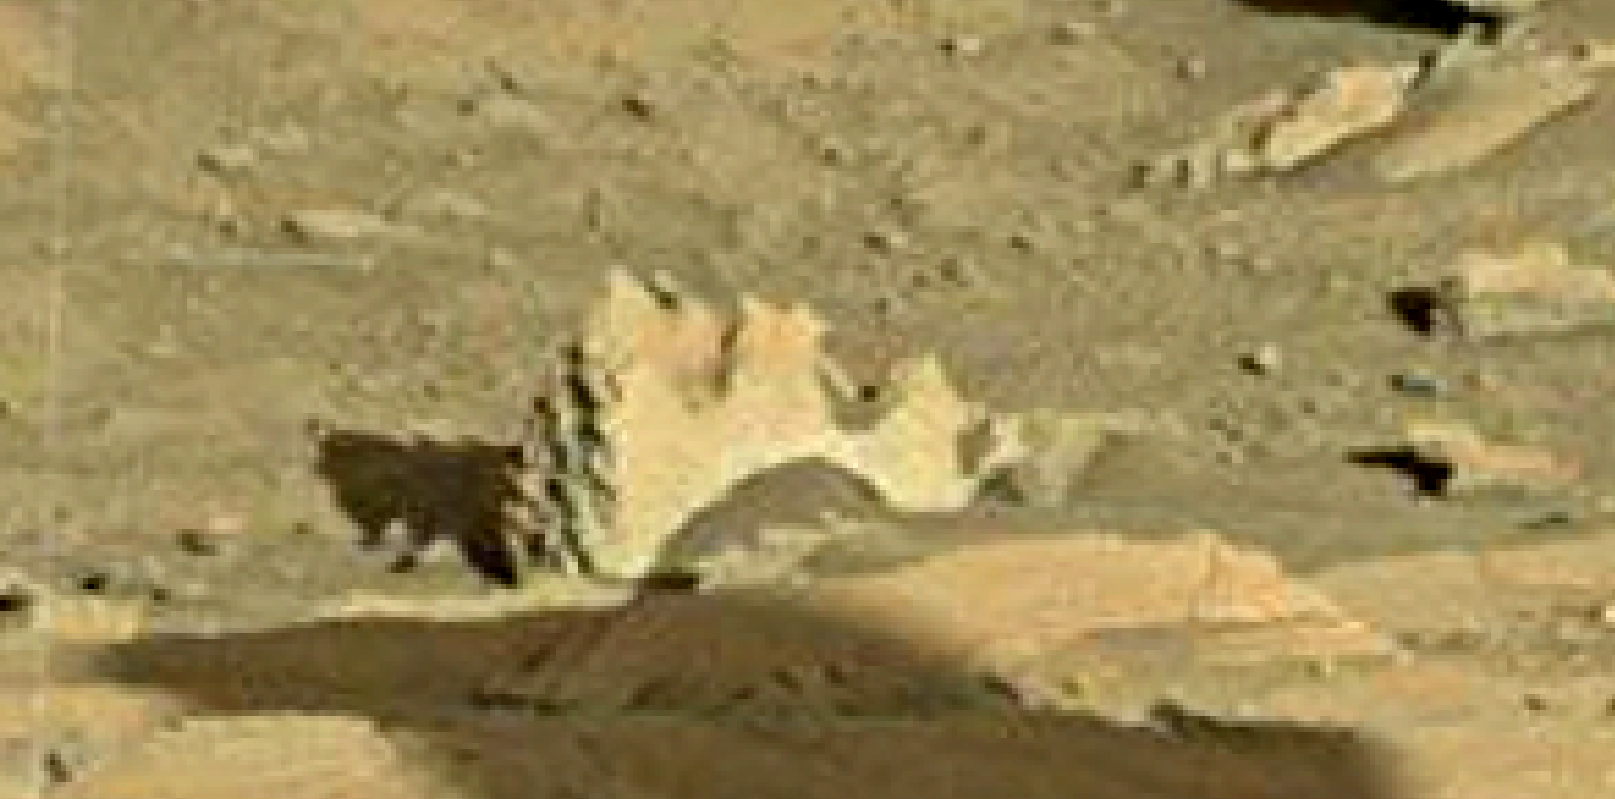 mars sol 1302 anomaly-artifacts 6 was life on mars